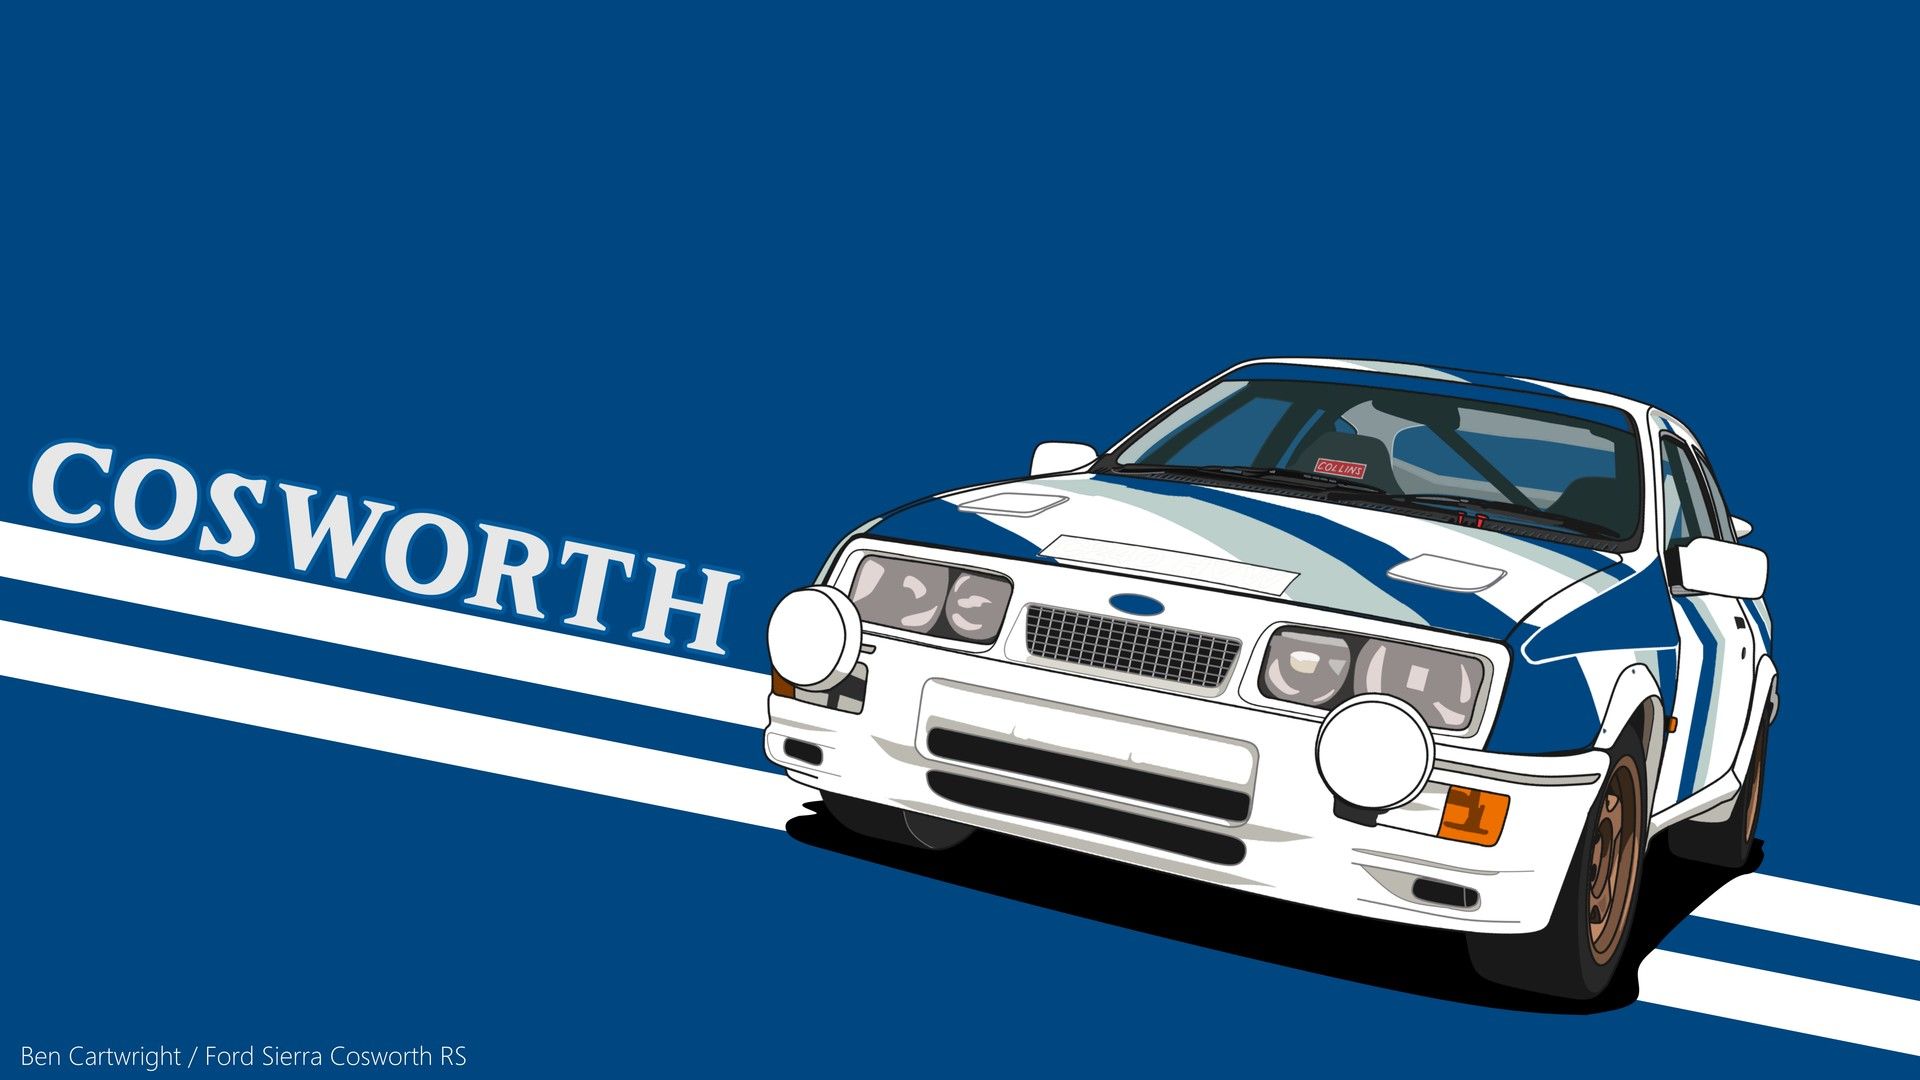 Ford Sierra RS Cosworth, Ben Cartwright